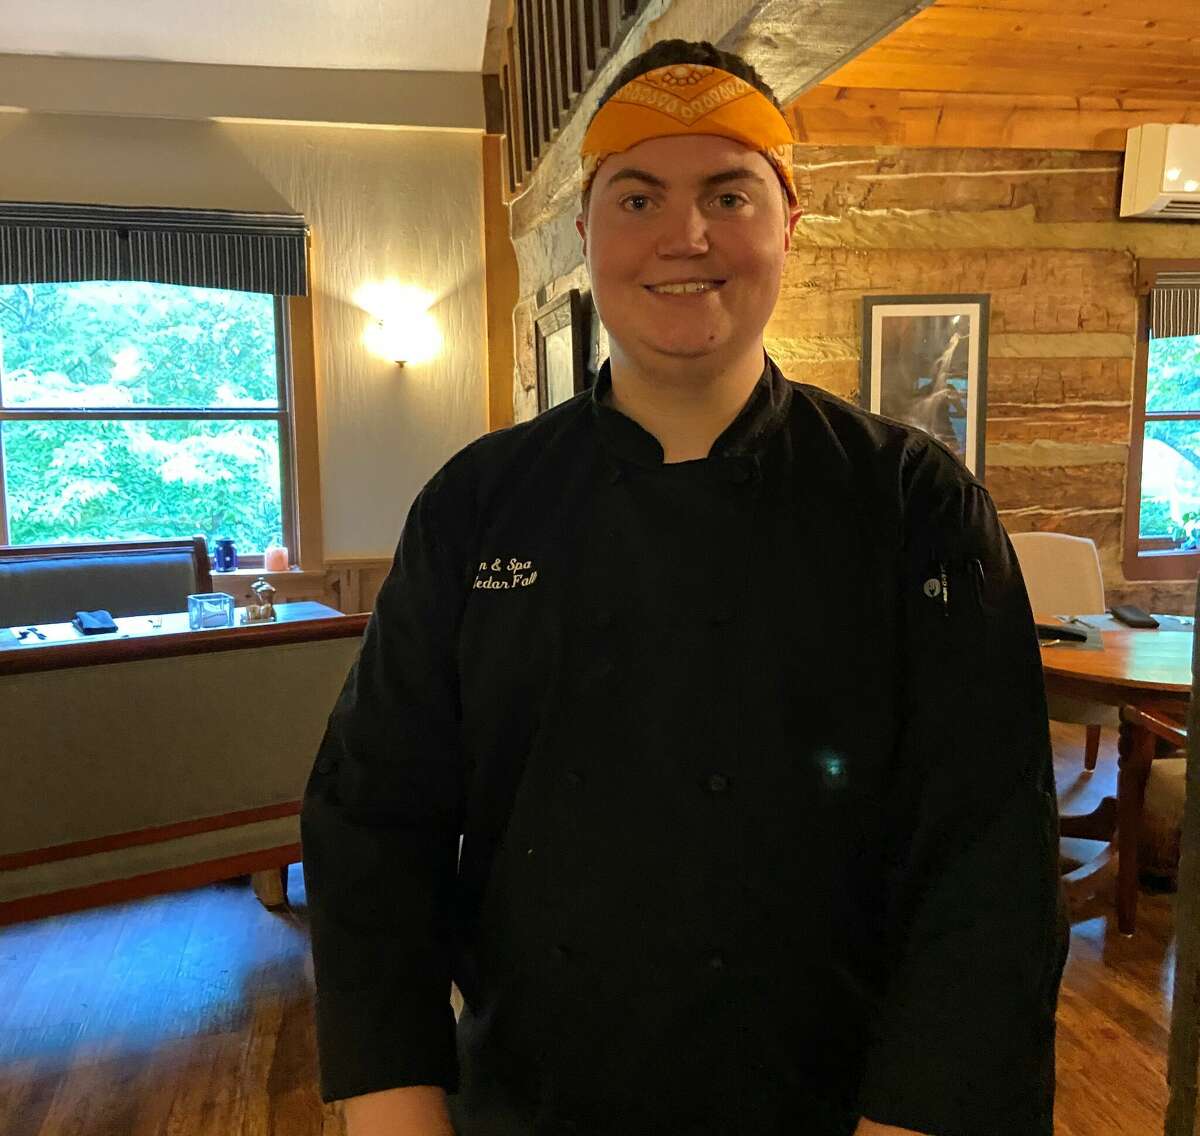 Josh Thurston is a Hocking Hills resident who took culinary classes in high school and has worked his way up to become executive chef at the Kindred Spirits Restaurant in Hocking Hills in southeastern Ohio.